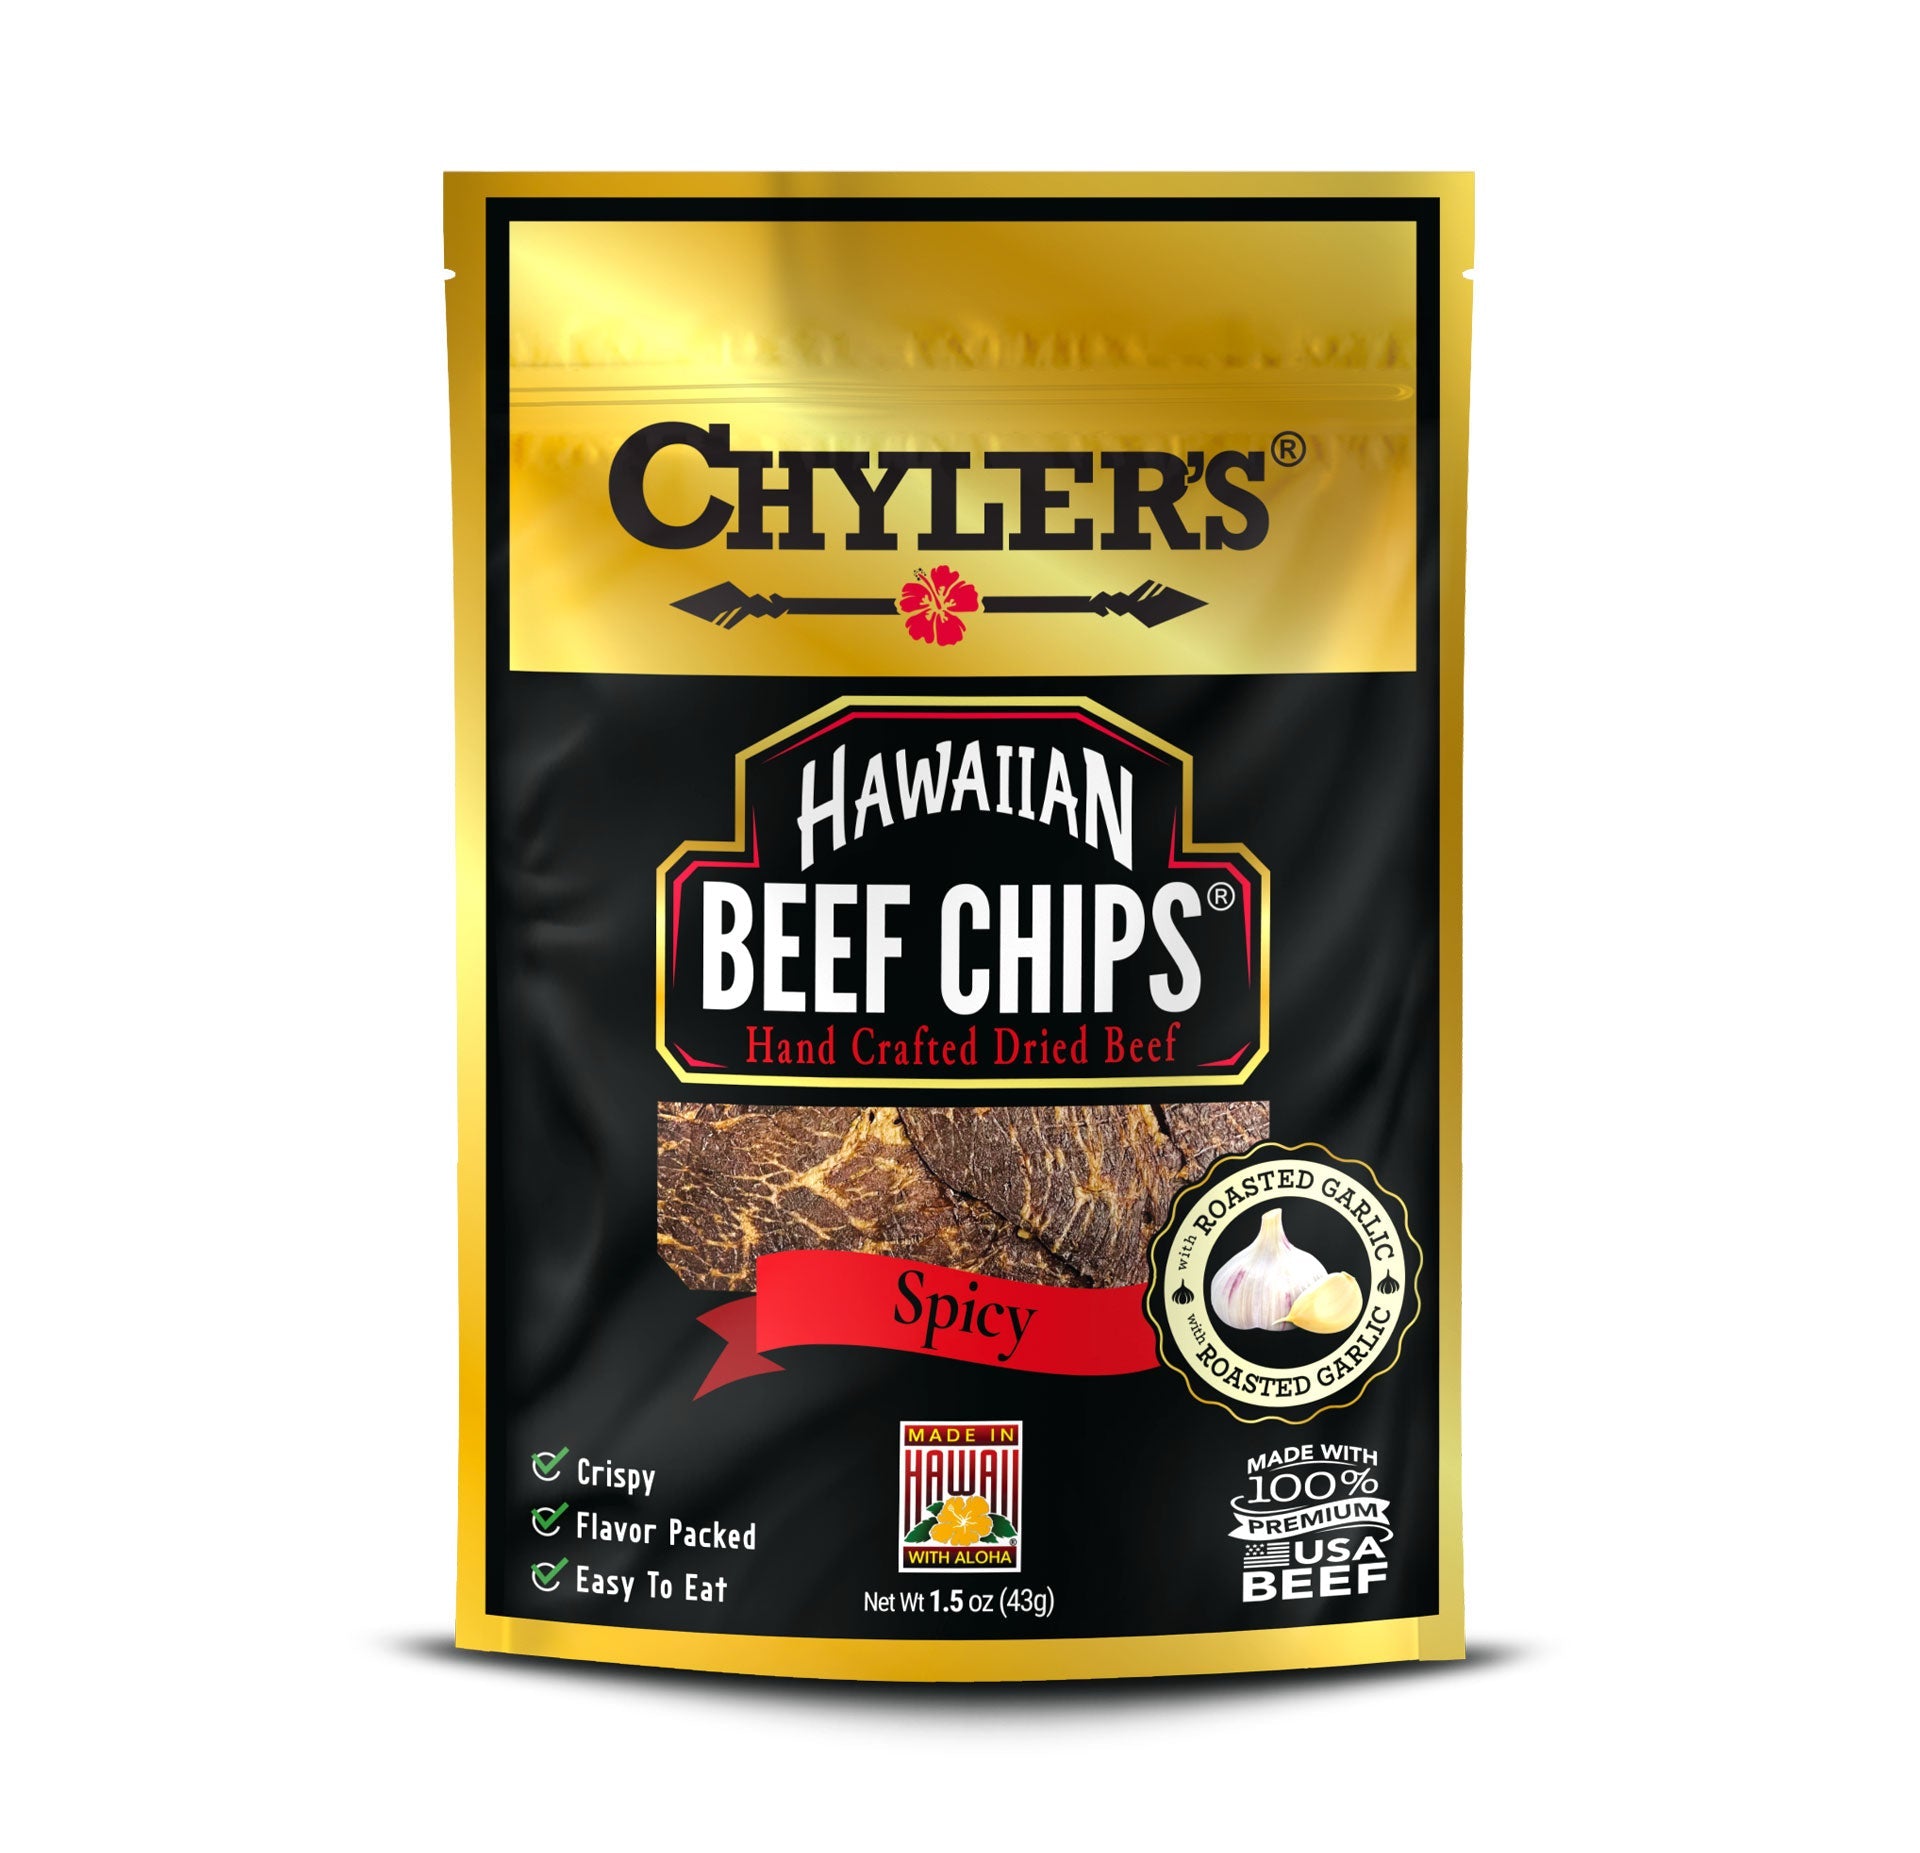 Hawaiian Beef Chips® Spicy with Roasted Garlic - Chylers